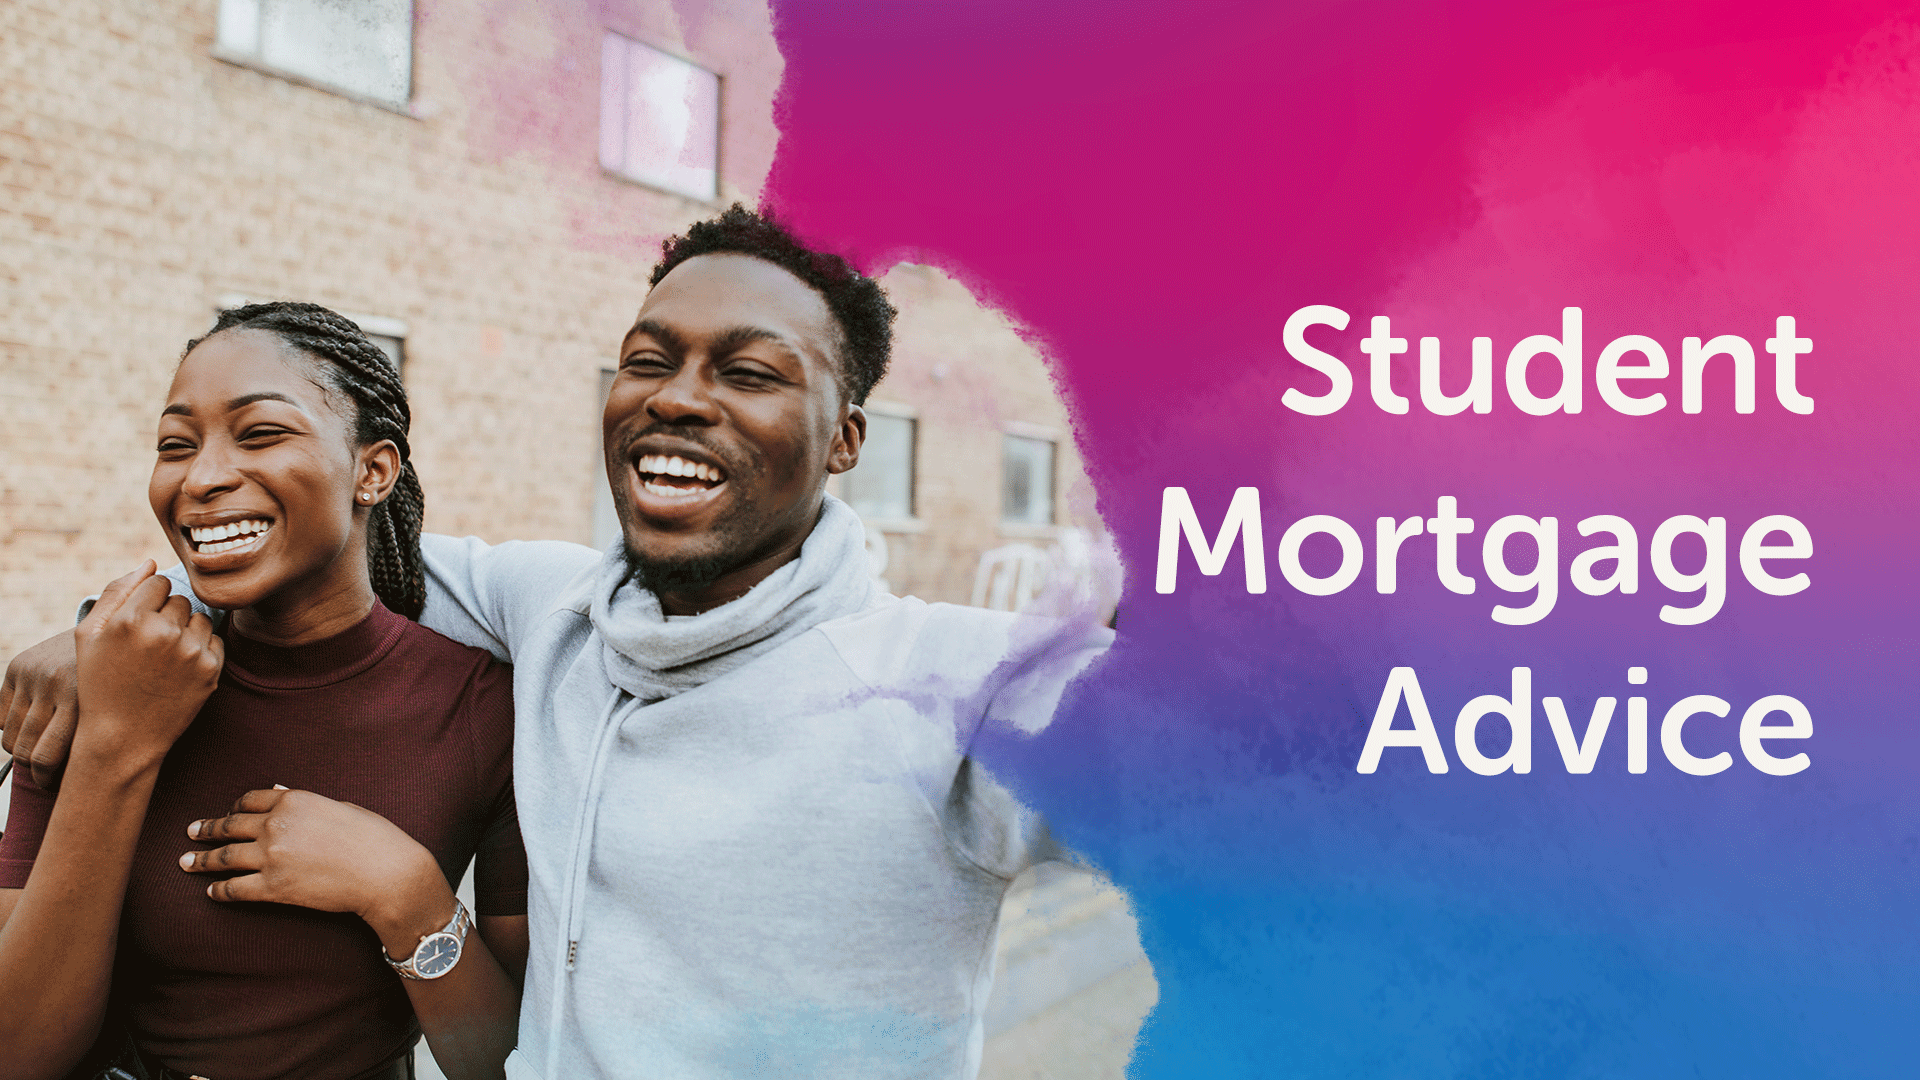 Can a Student Get a Mortgage in Manchester?